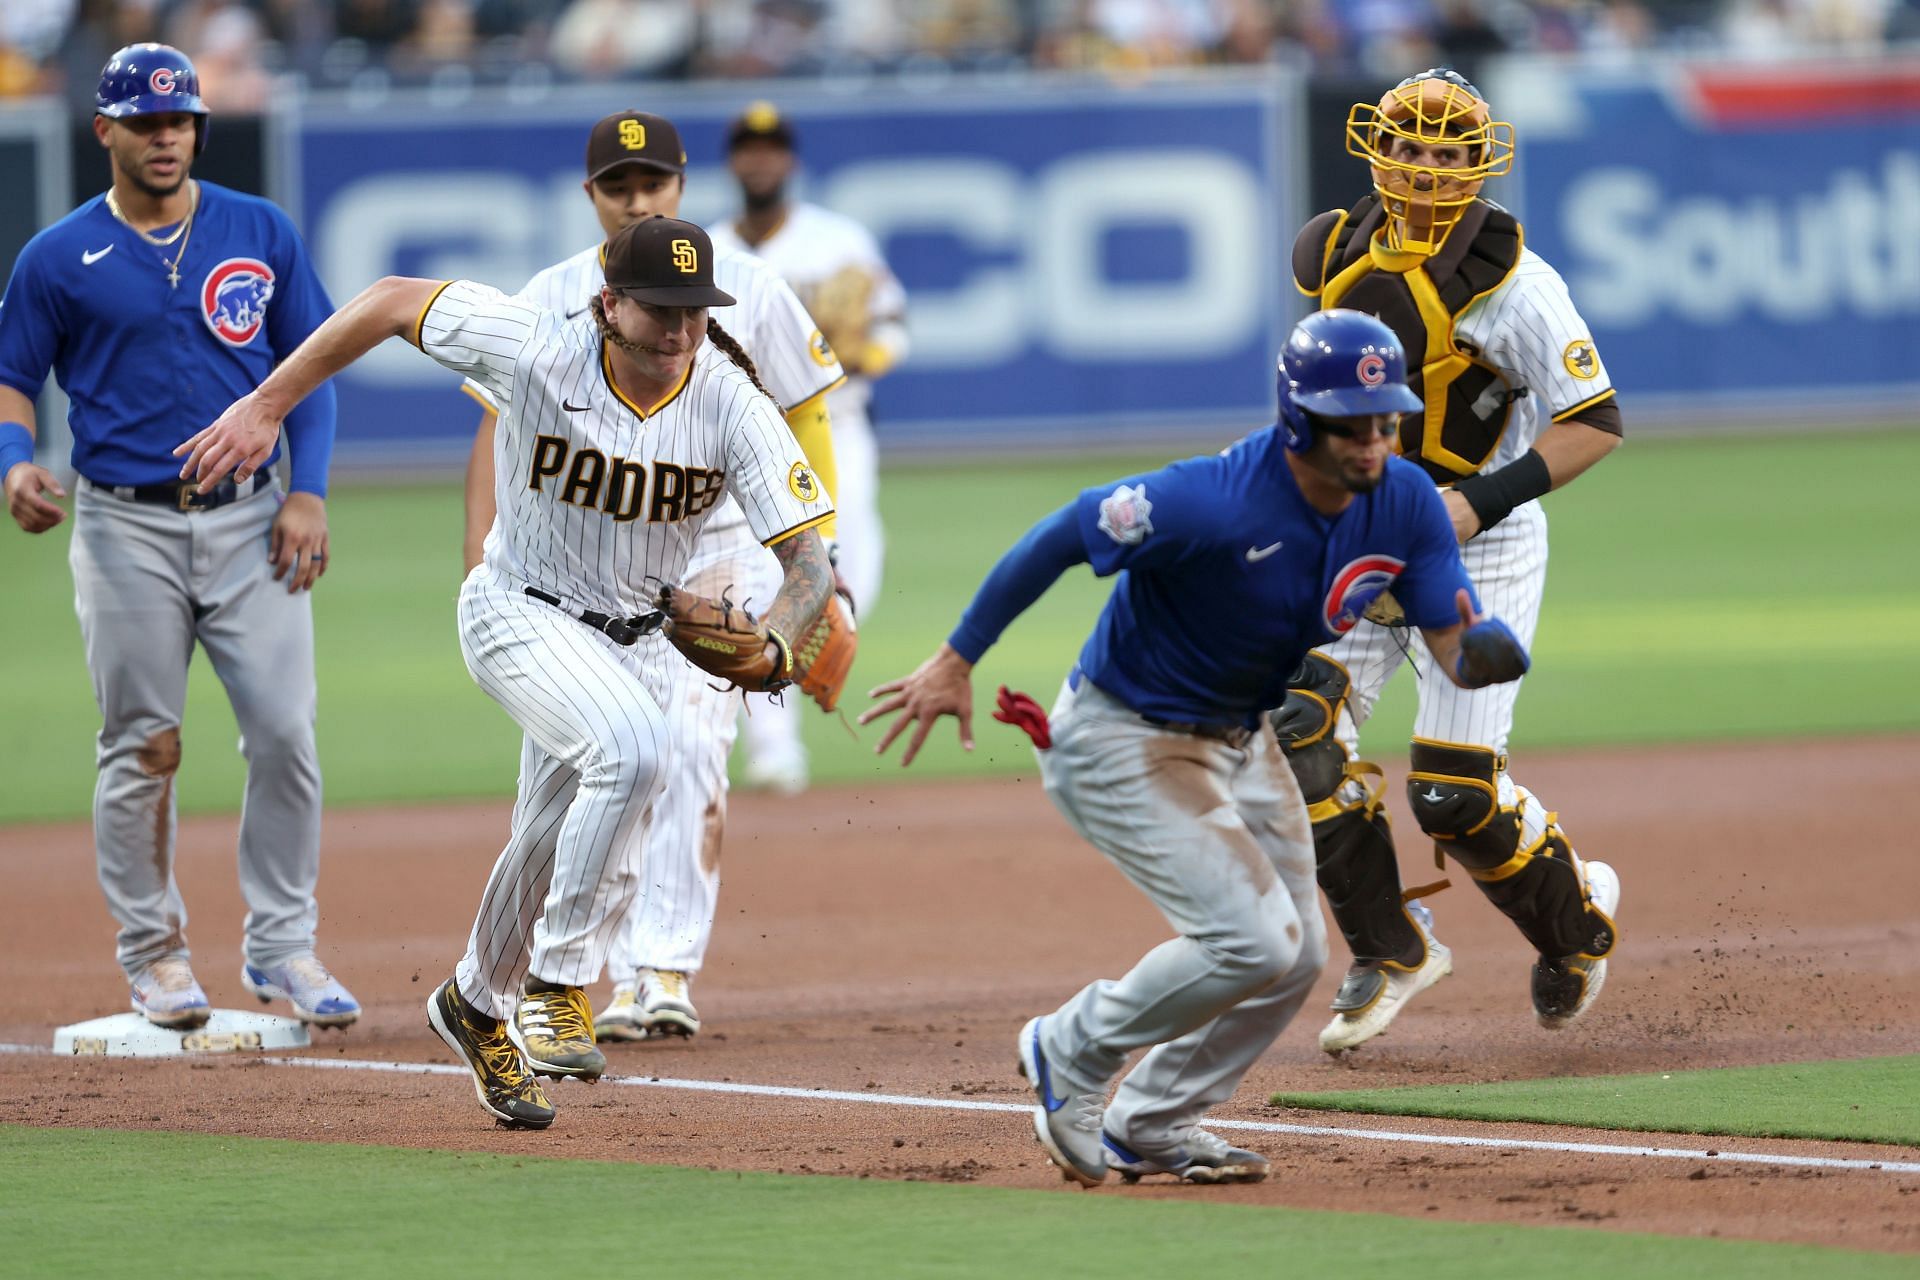 The Cubs face the Padres on Tuesday.